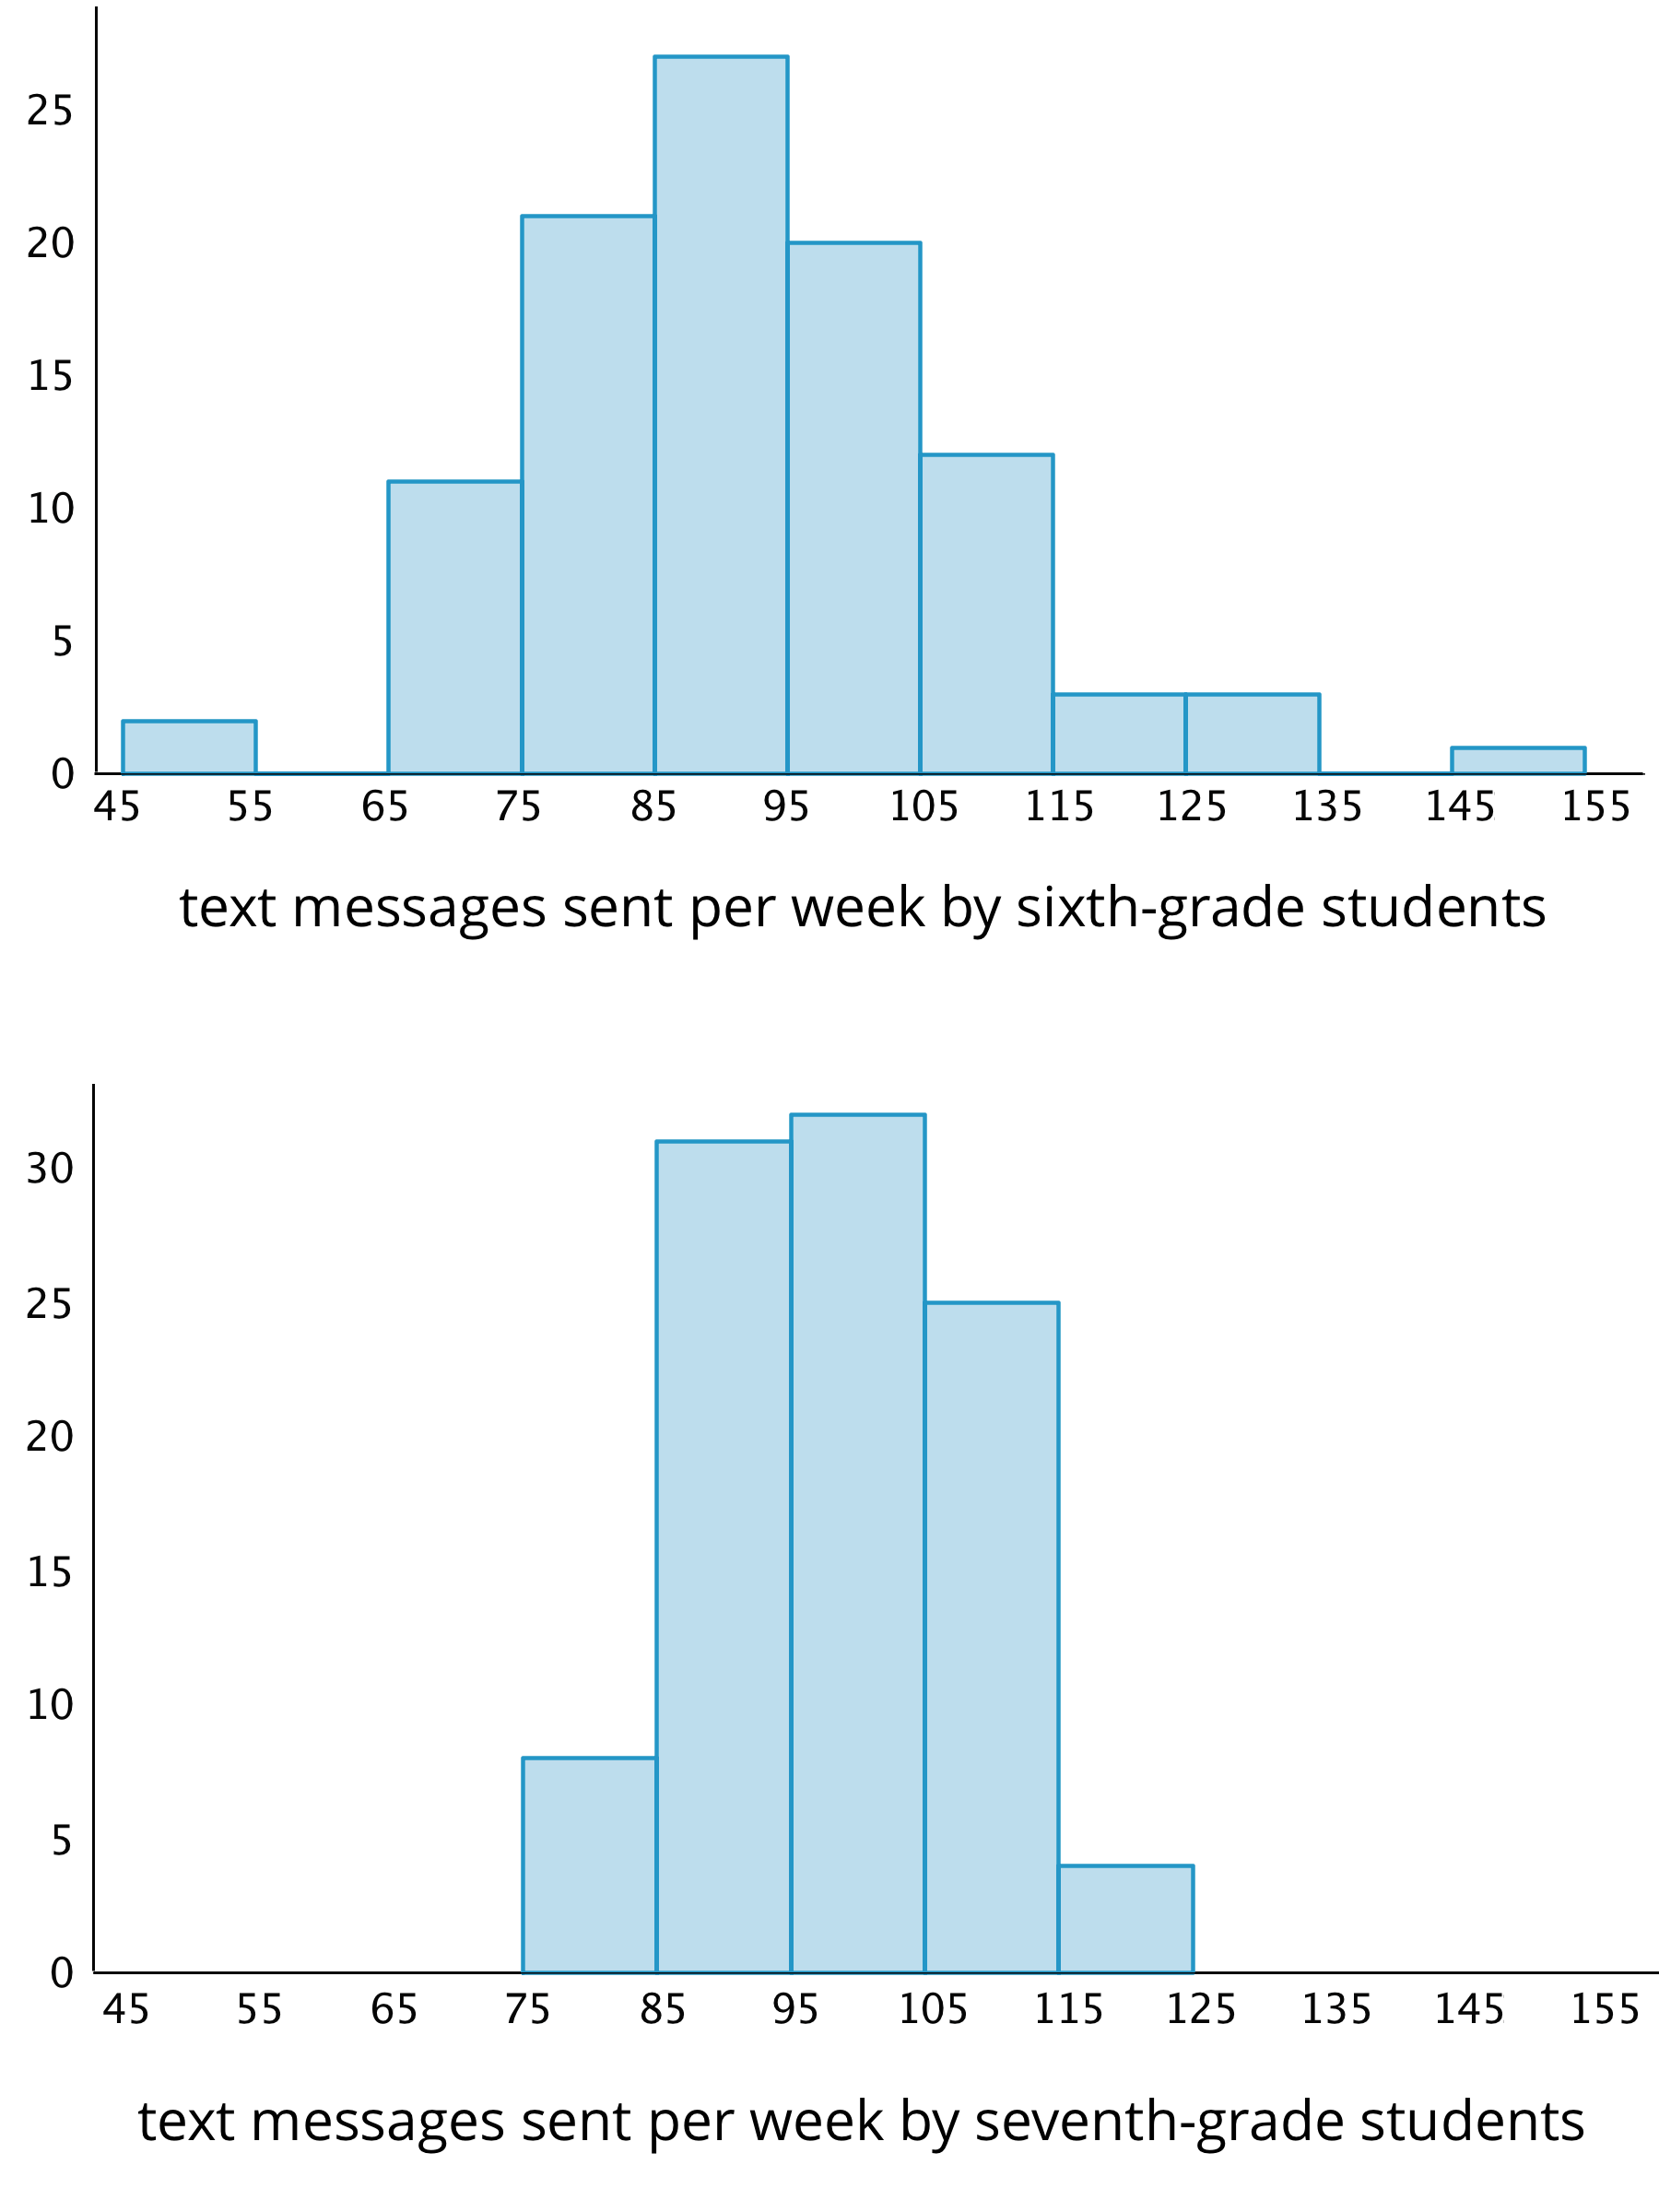 Two histograms where the top graph is labeled "sixth-grade students" and the bottom graph is labeled "seventh-grade students".  For the "six-grade students", the numbers 45 through 155, in increments of 10, are indicated along the horizontal axis. On the vertical axis, the numbers 0 through 25, in increments of 5, are indicated.  The approximate data represented by the bars are as follows: From 45 up to 55 text messages, 2 students From 65 up to 75 text messages, 11 students From 75 up to 85 text messages, 22 students From 85 up to 95 text messages, 26 students From 95 up to 105 text messages, 20 students From 105 up to 115 text messages, 12 students From 115 up to 125 text messages, 3 students From 125 up to 135 text messages, 3 students From 145 up to 155 text messages, 1 student  For the "seventh-grade students", the numbers 45 through 155, in increments of 10, are indicated along the horizontal axis. On the vertical axis, the numbers 0 through 30, in increments of 5, are indicated.   The approximate data represented by the bars are as follows: From 75 up to 85 text messages, 8 students From 85 up to 95 text messages, 31 students From 95 up to 105 text messages, 32 students From 105 up to 115 text messages, 25 students From 115 up to 125 text messages, 4 students